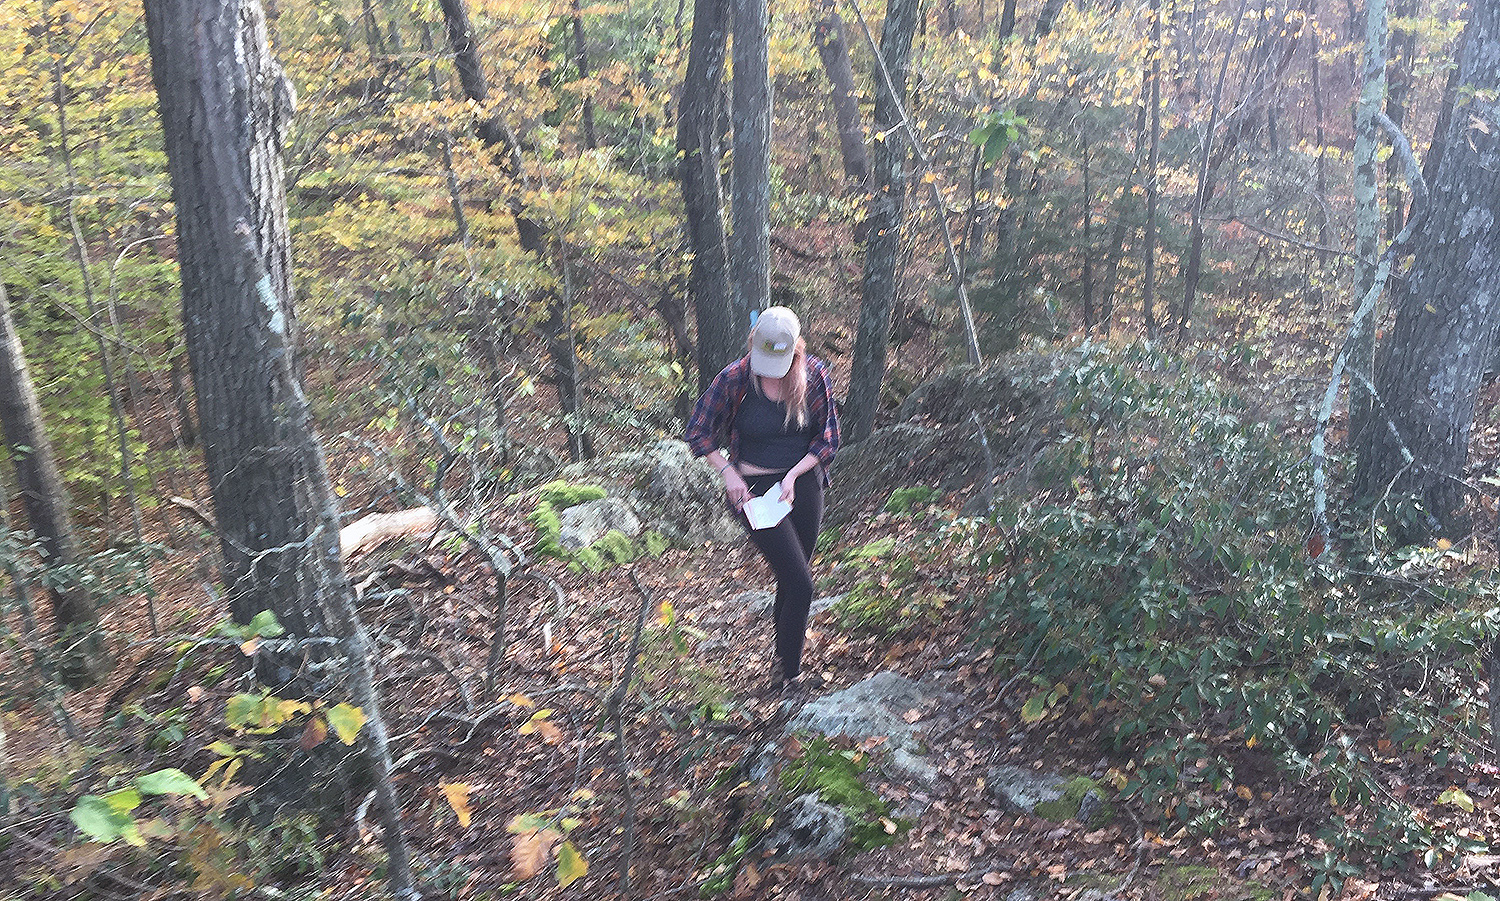 Earth and environmental sciences major Jackie Buskop '19 collects field data along a hiking trail in Connecticut. (Photo by Melissa Luna)